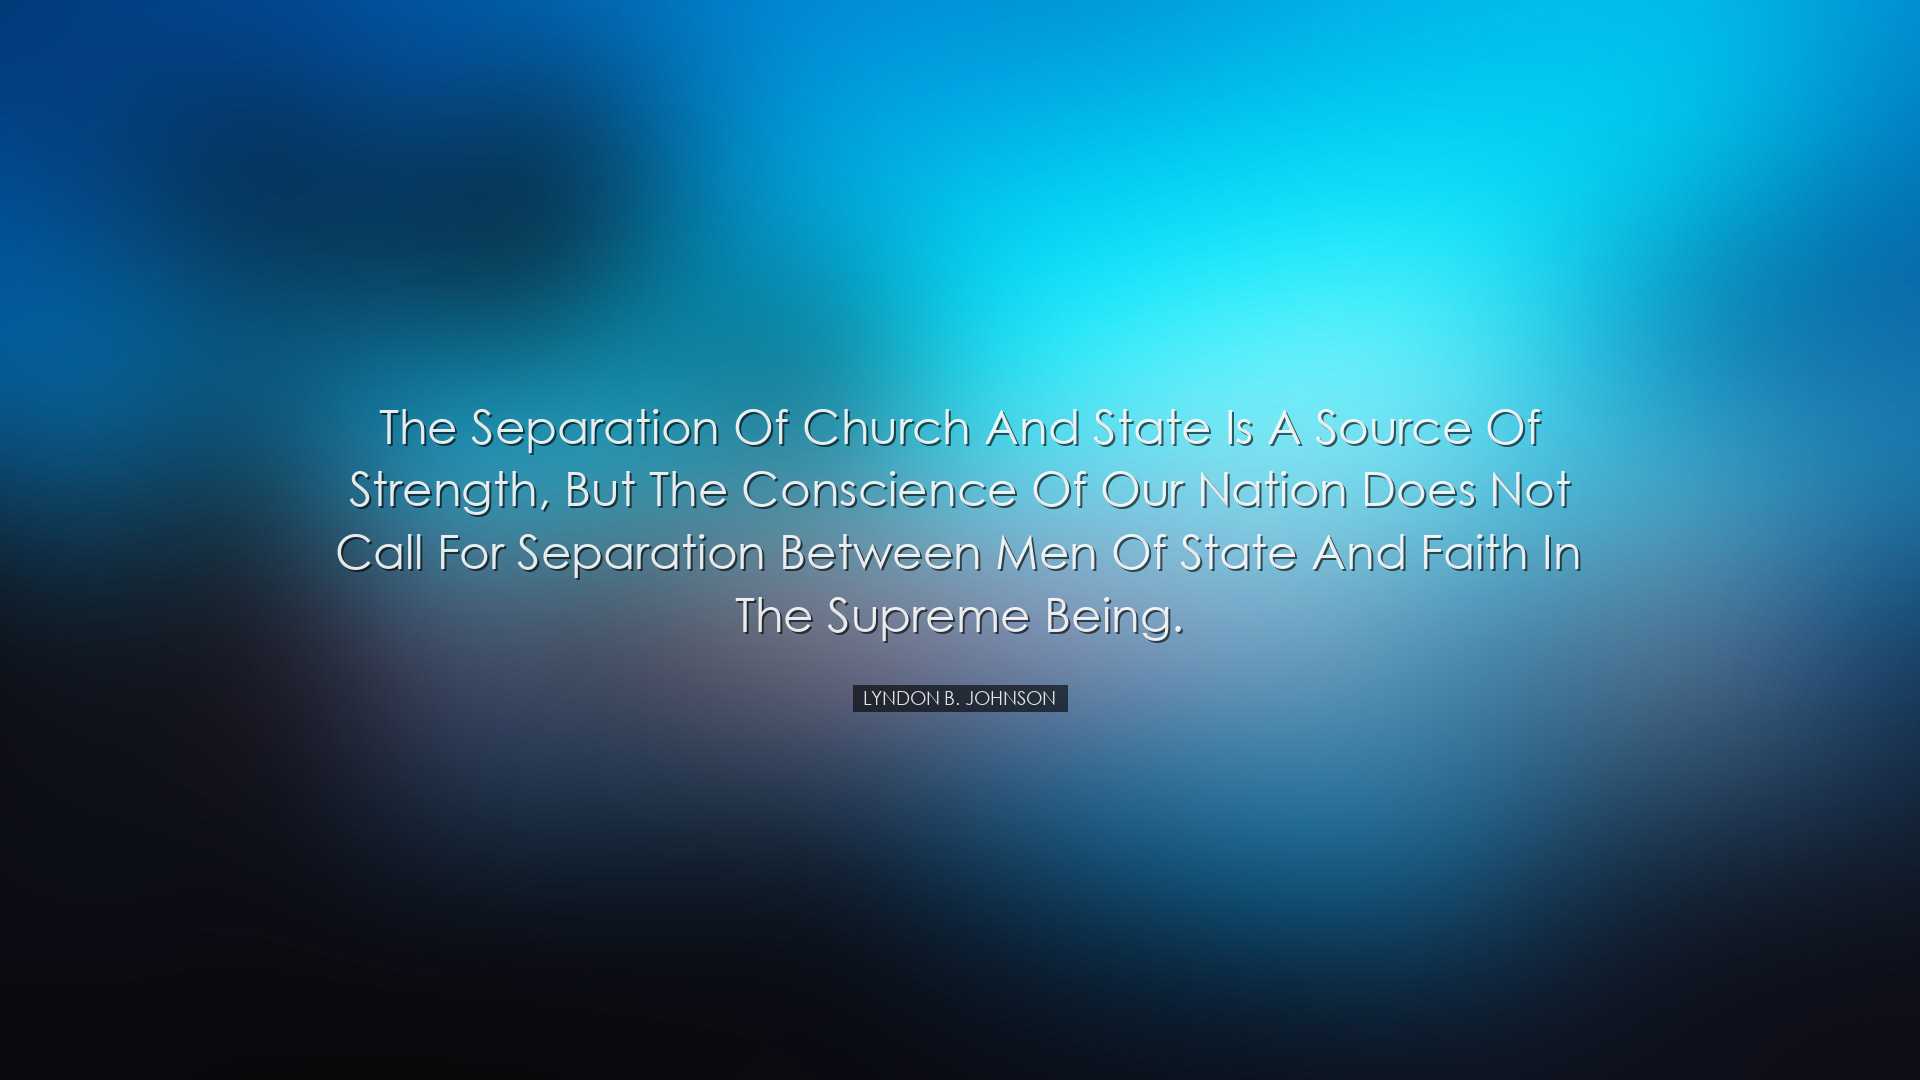 The separation of church and state is a source of strength, but th